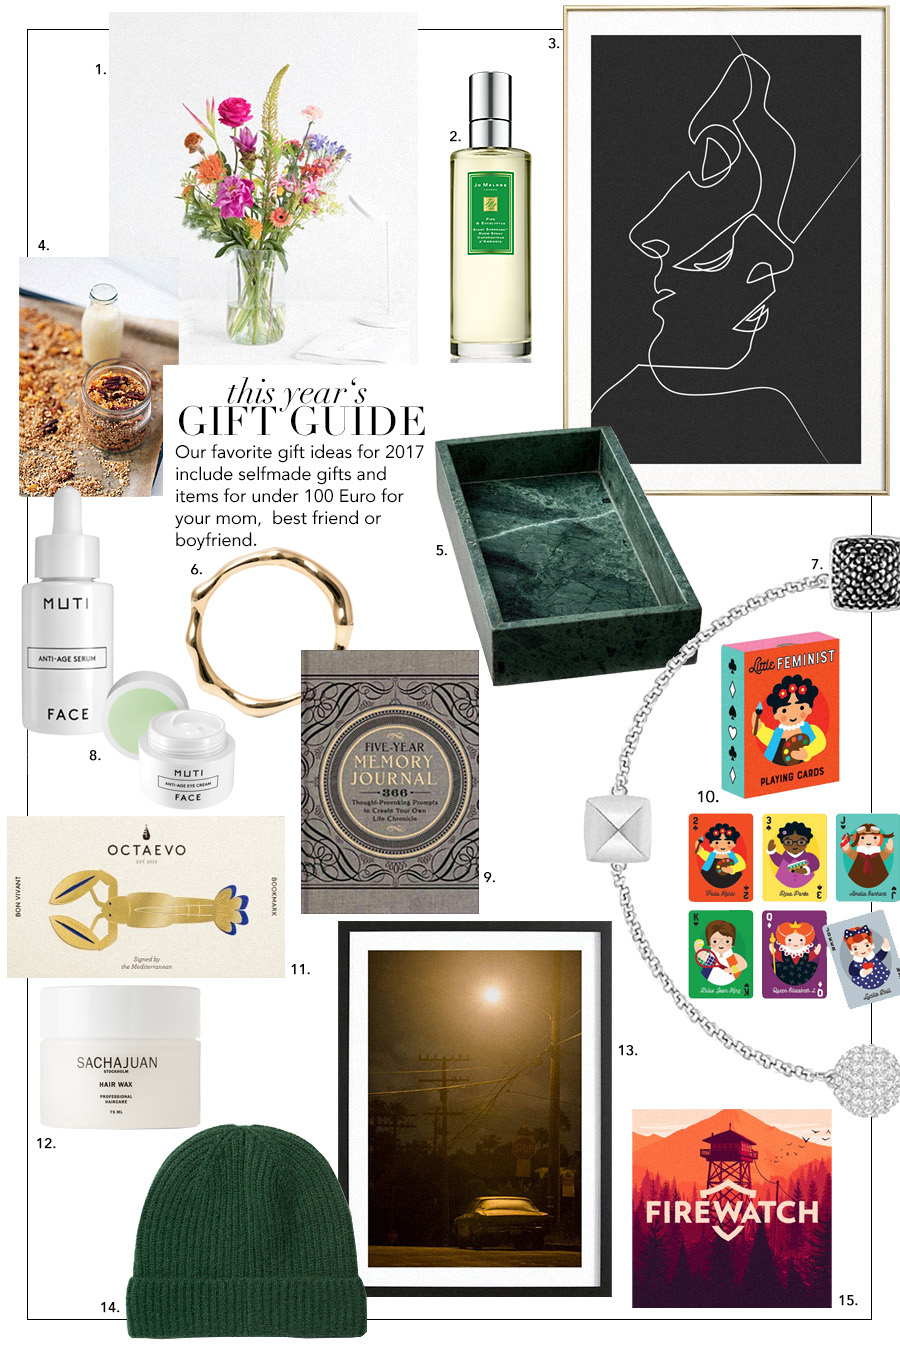 2017 Gift Guide under 100 Euro & my personal wishlist